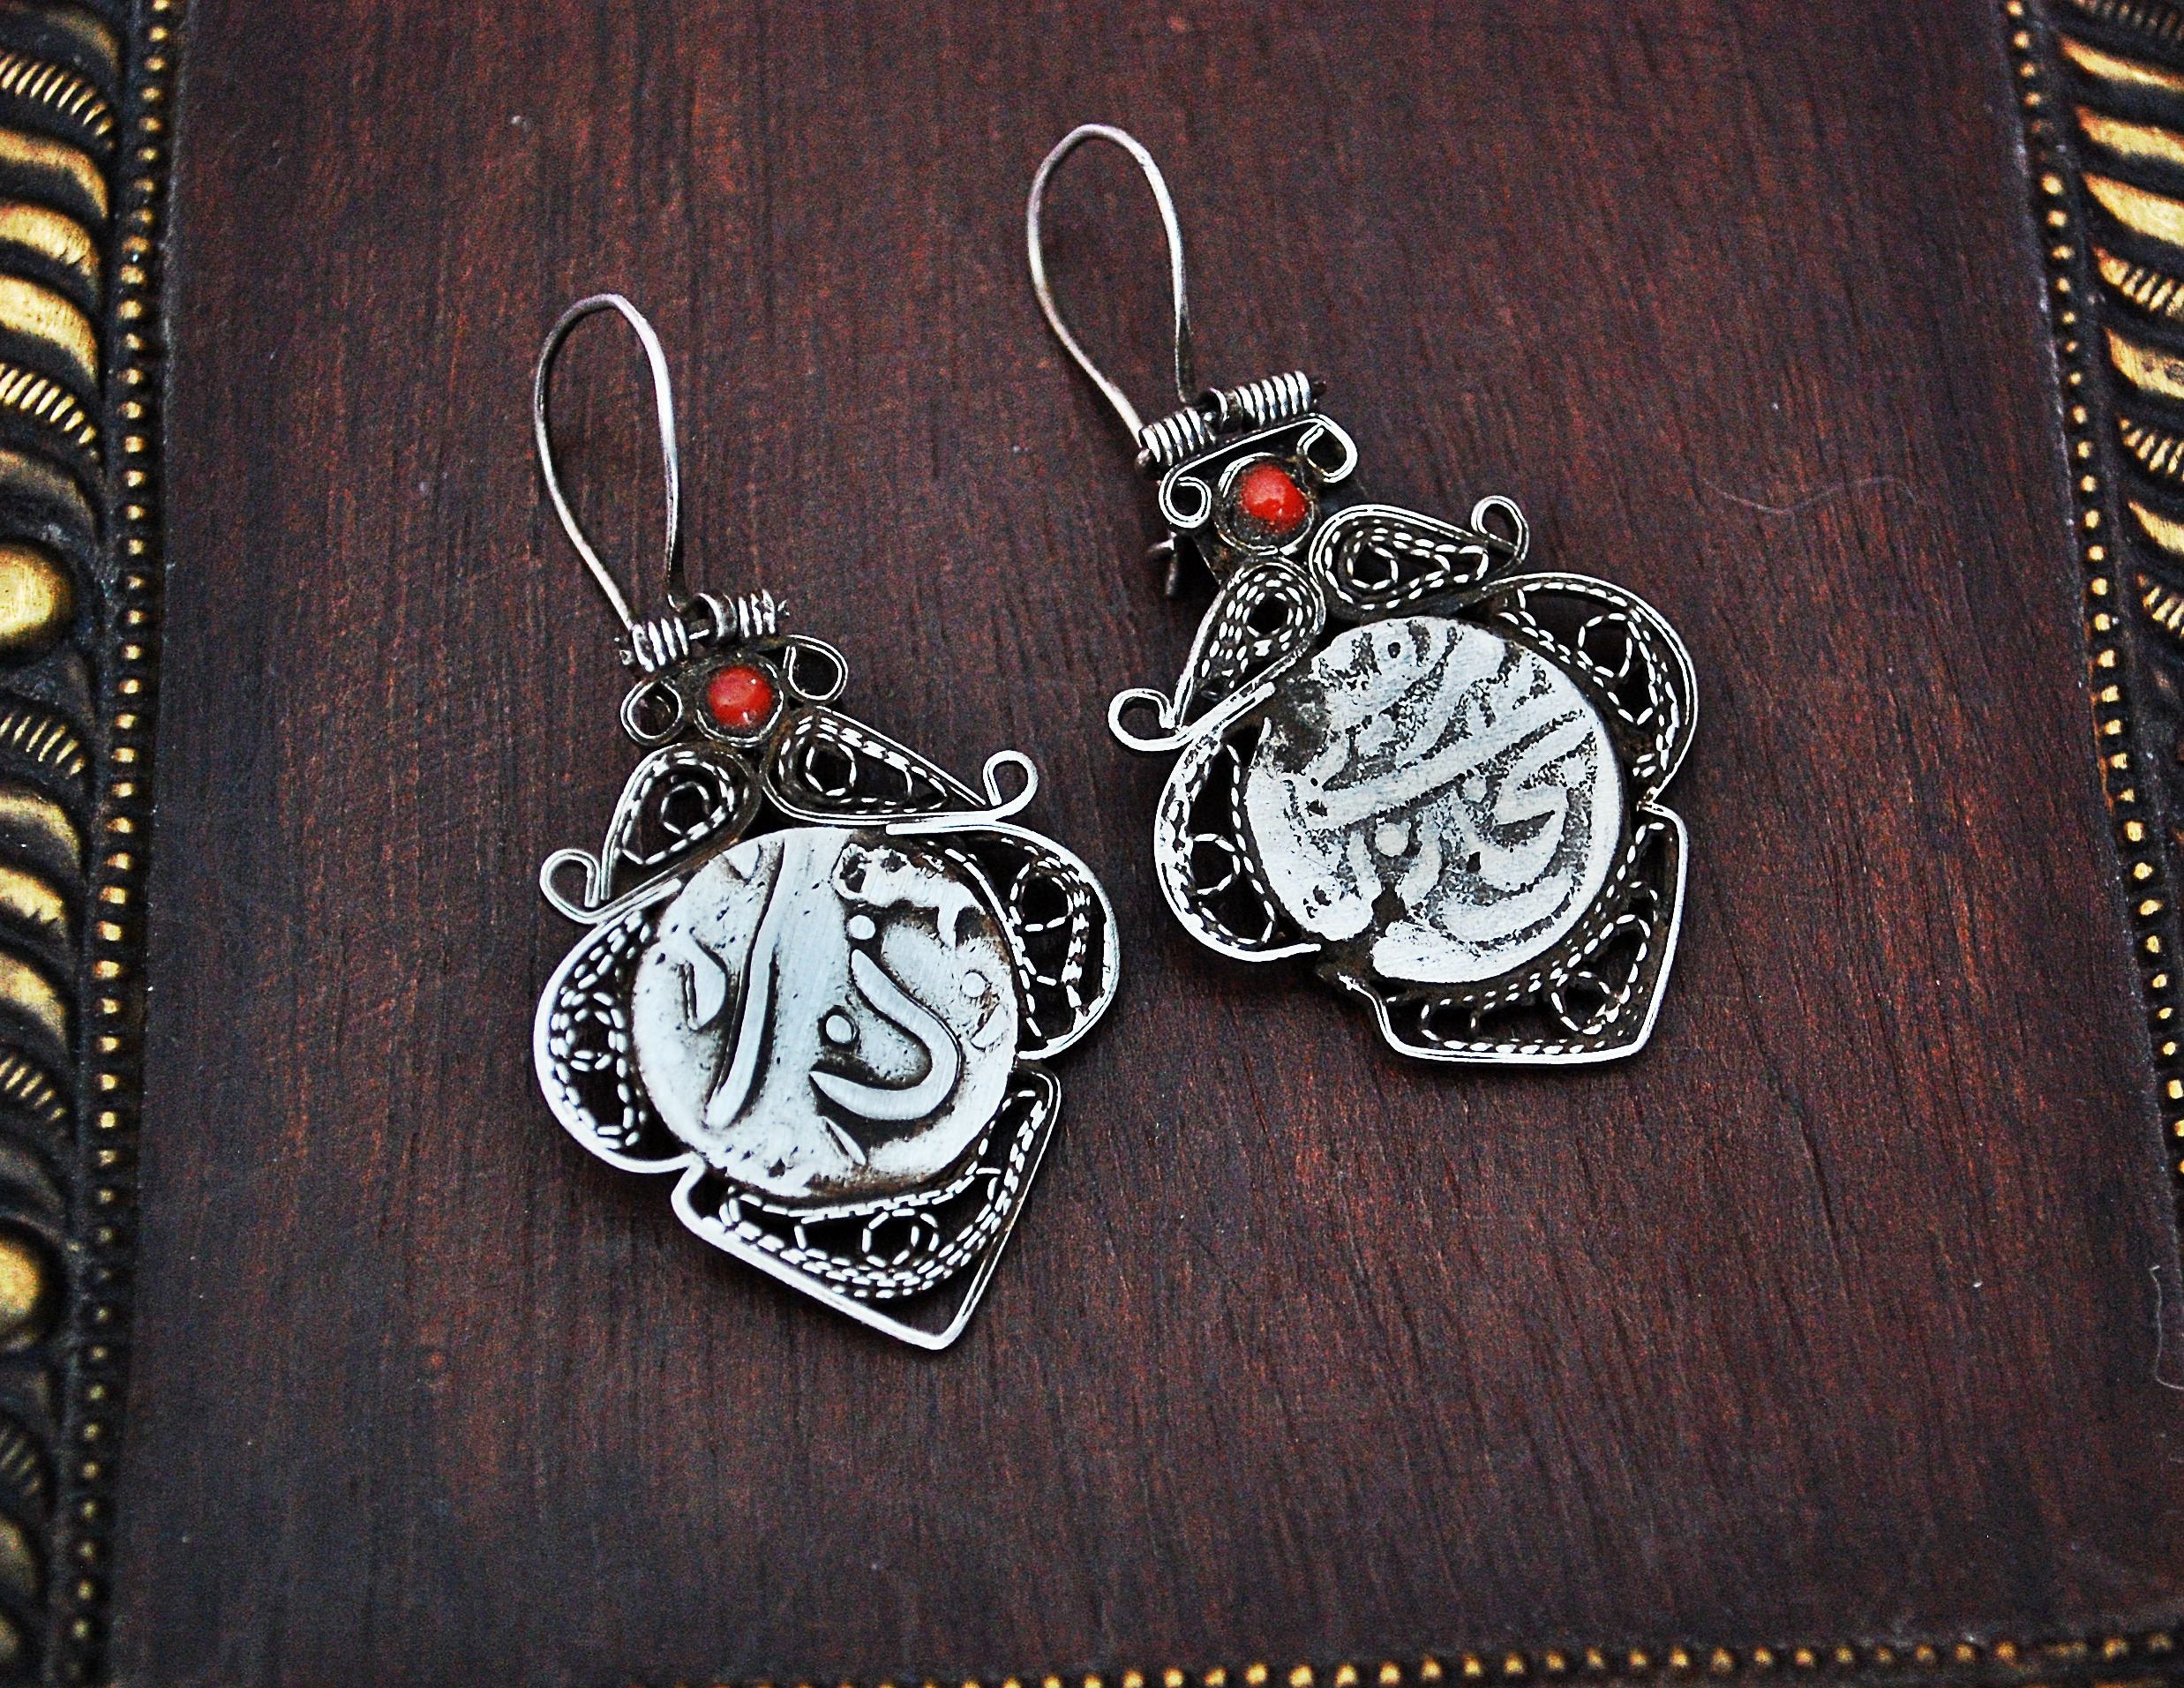 Afghani Coin Earrings with Coral - Kuchi Earrings - Tribal Earrings - Afghan Silver Earrings - Ethnic Jewelry